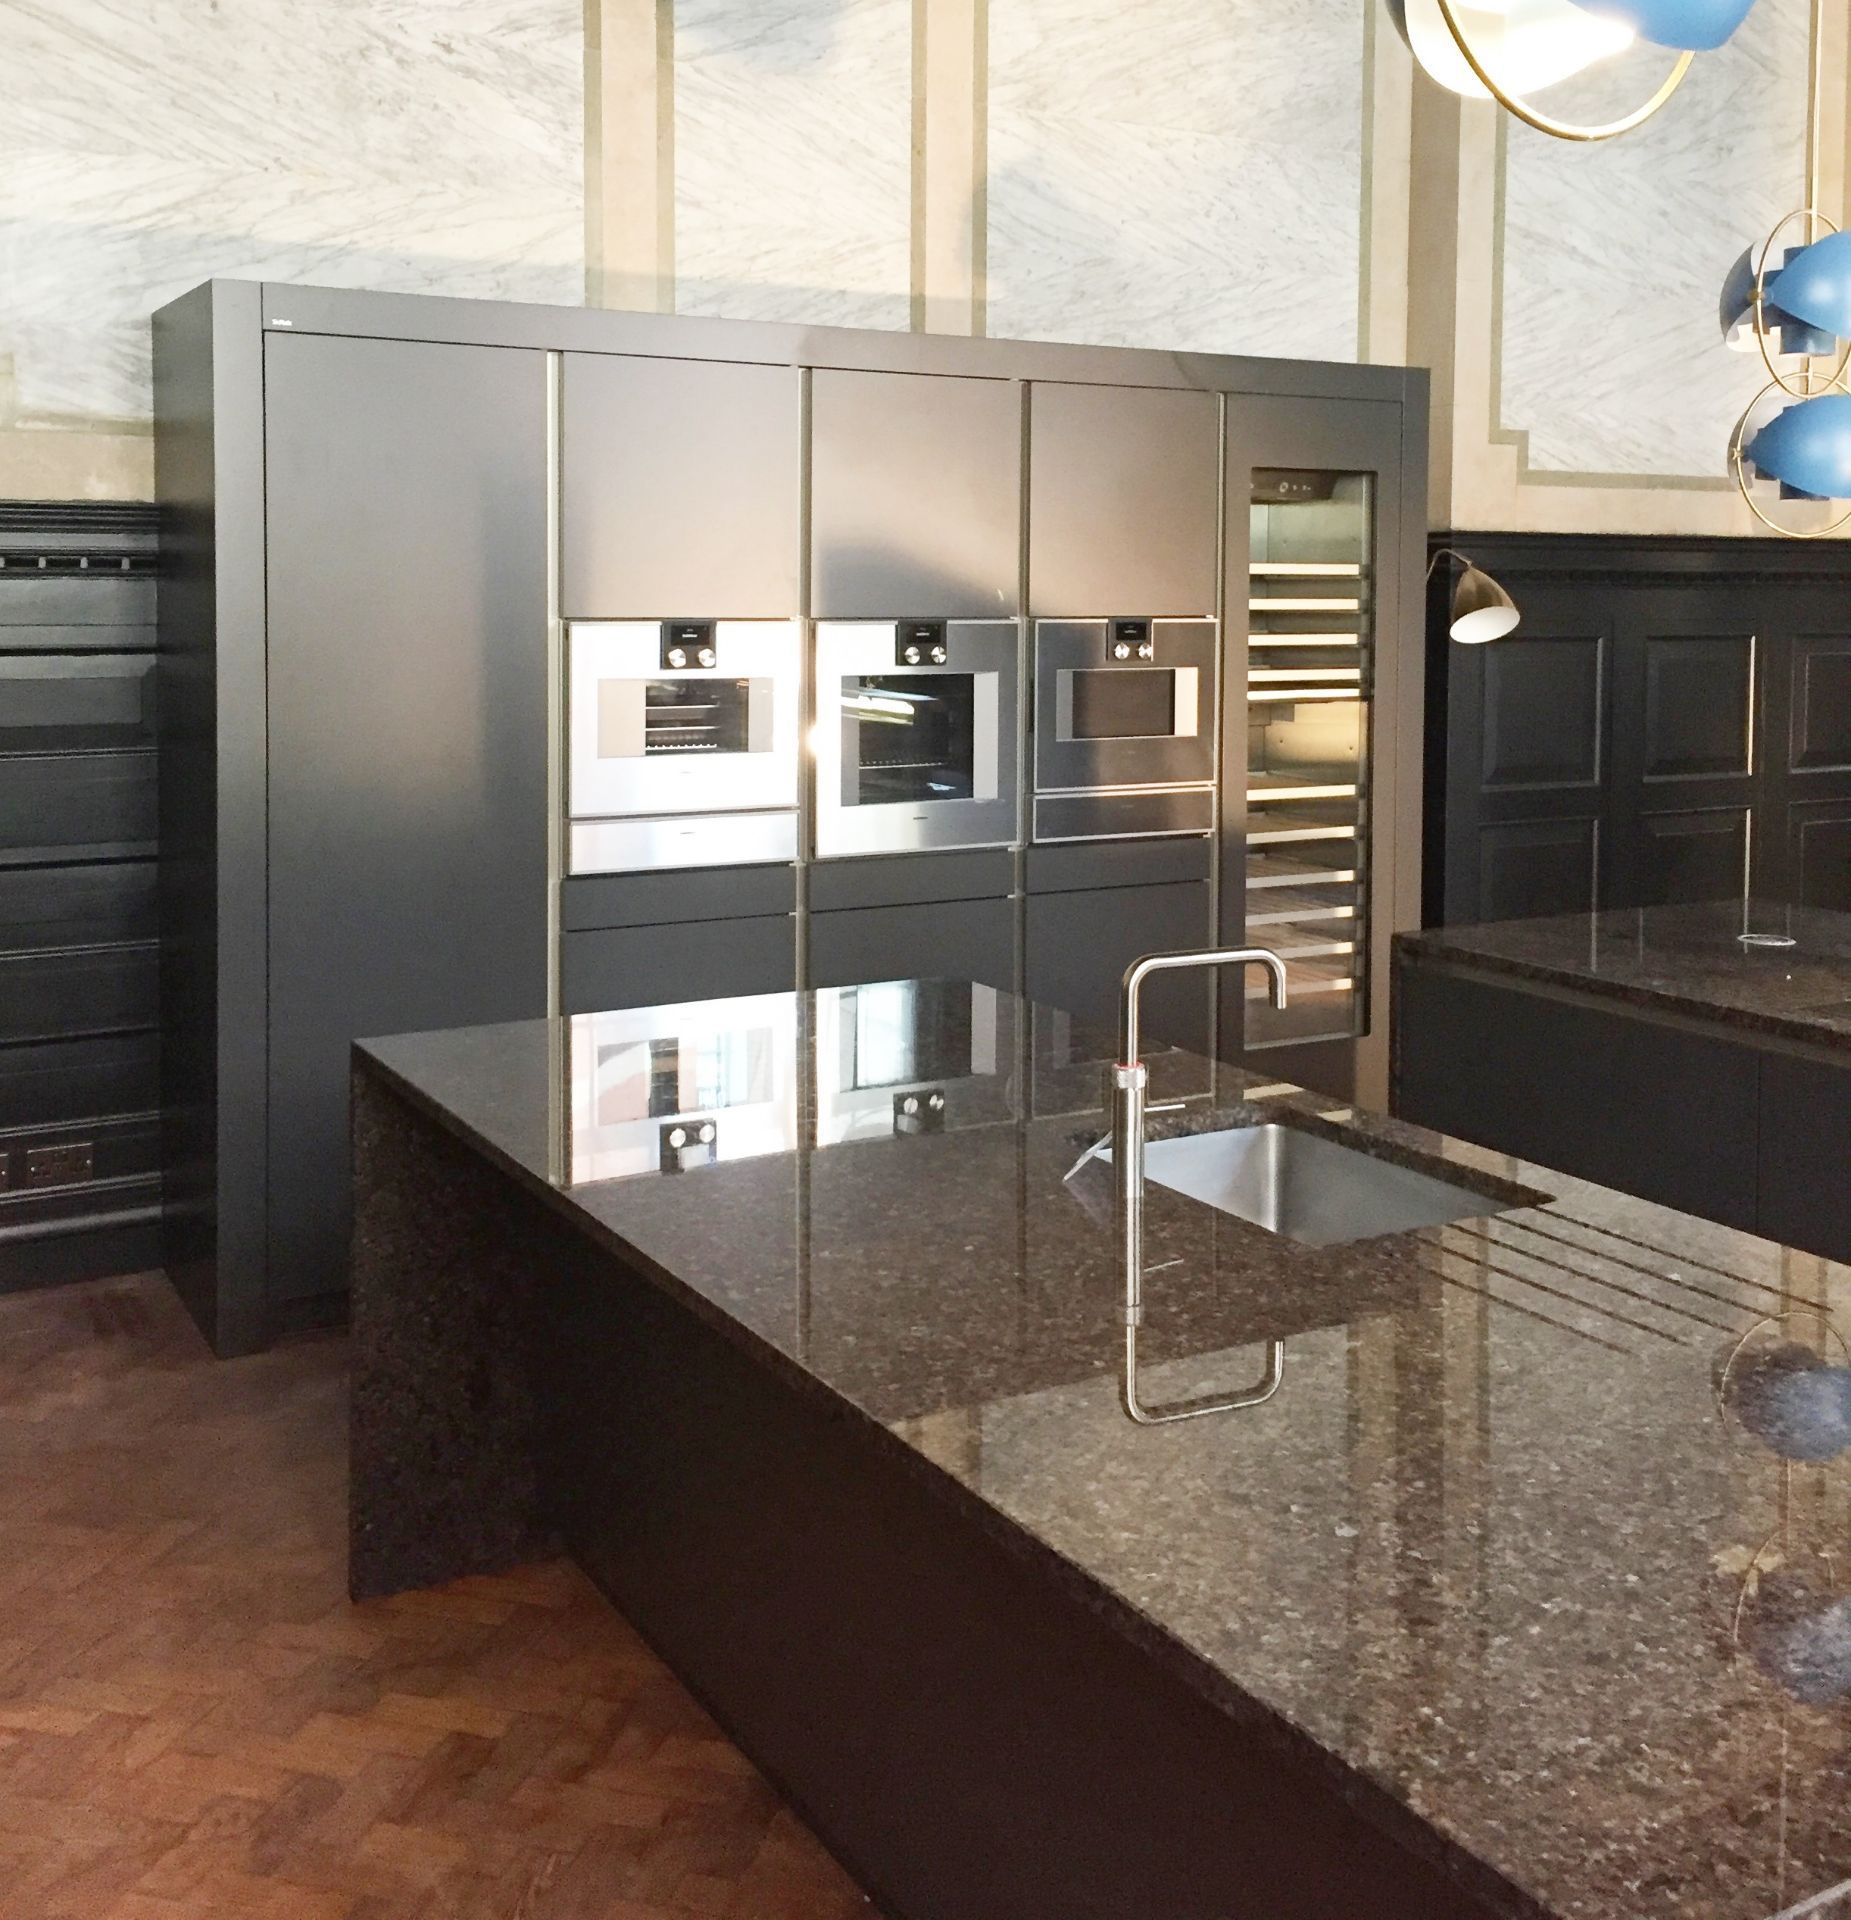 1 x SieMatic Fitted Kitchen in Basalt Grey Matt With Handleless Doors - Features Gaggenau - Image 3 of 10